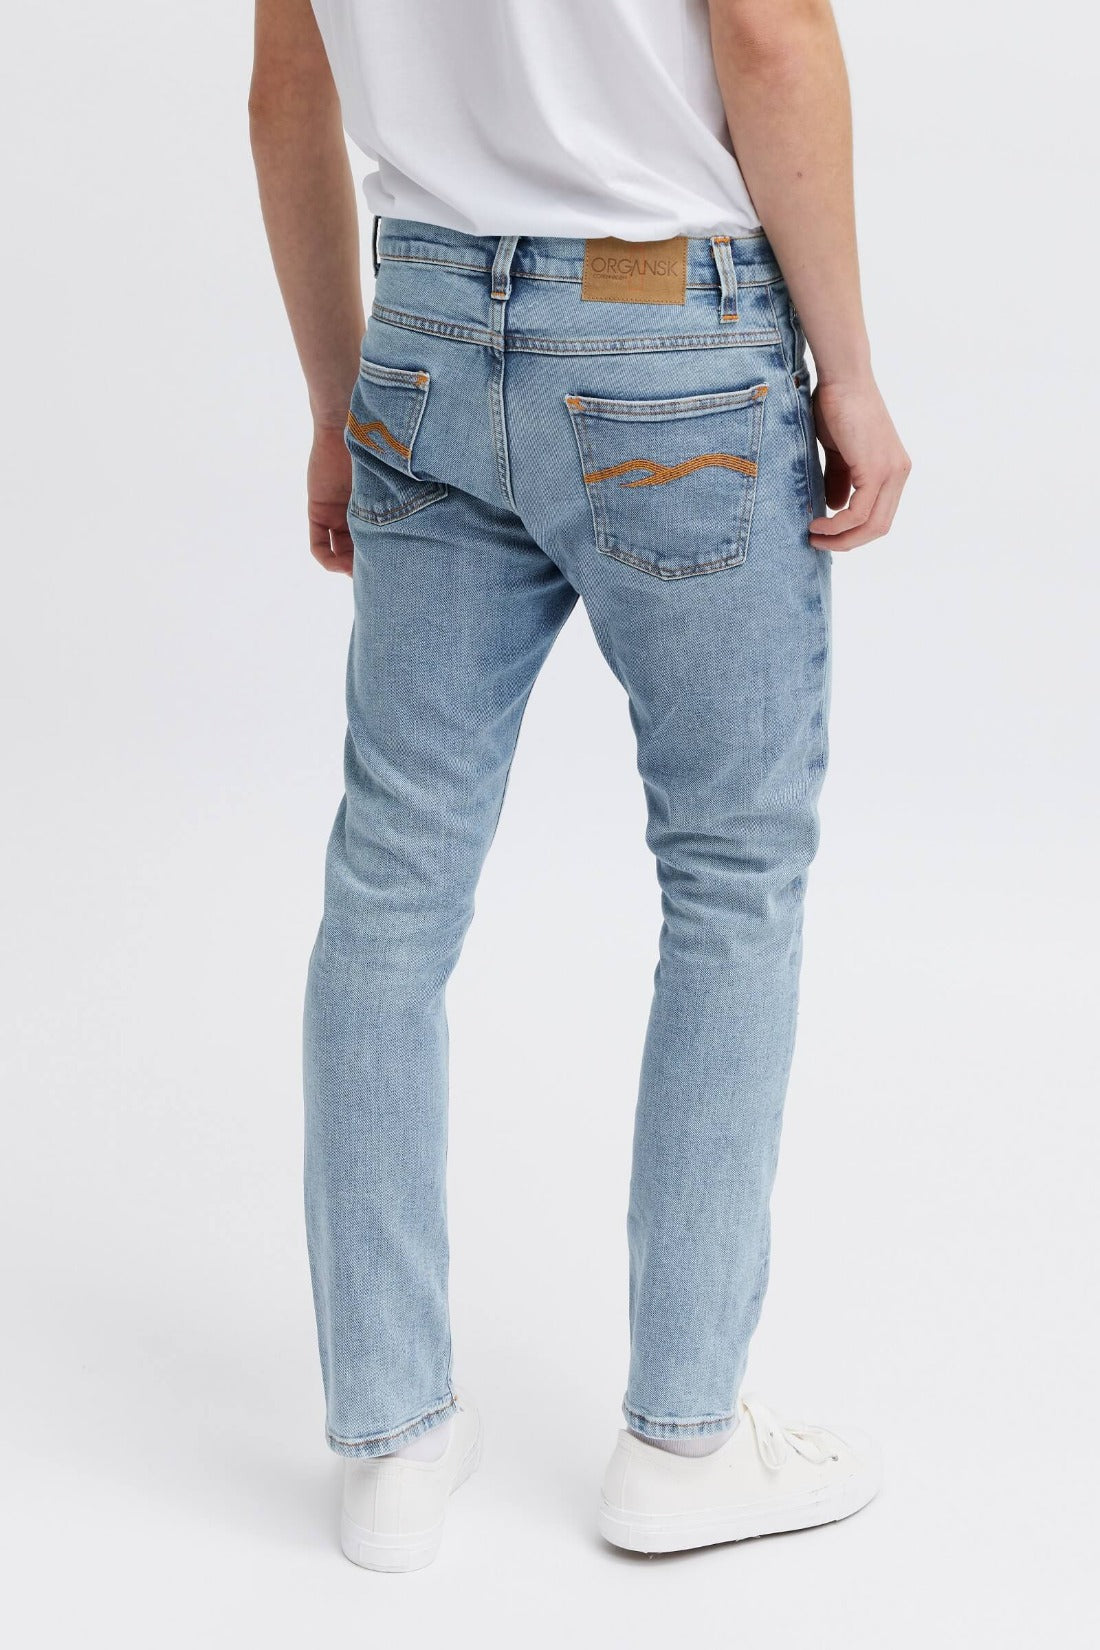 stylish and ethical jeans  